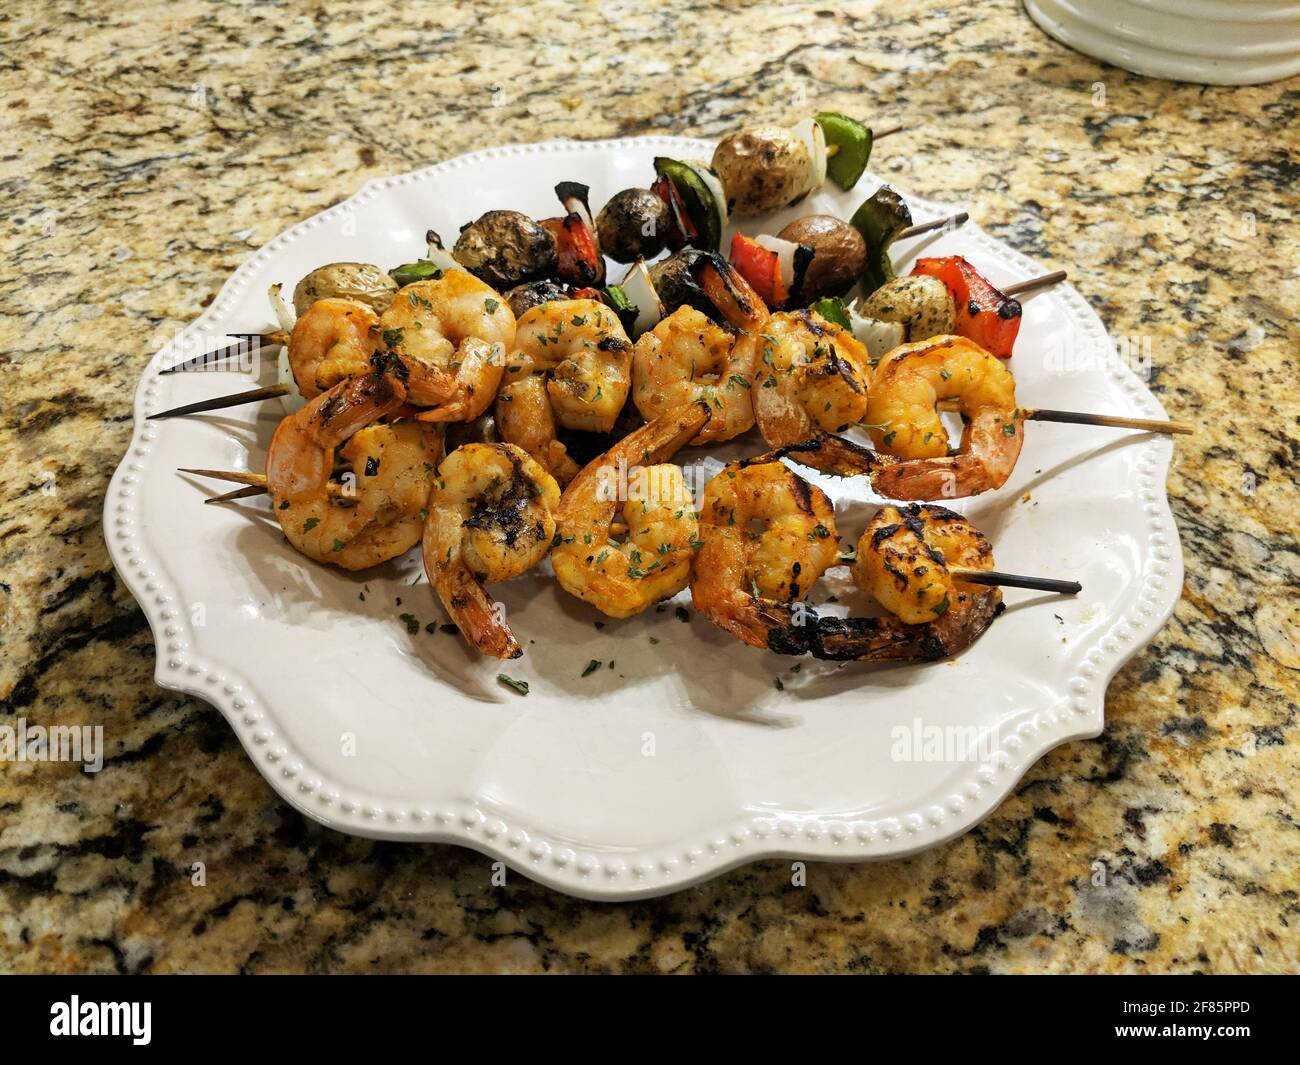 Grilled shrimp on skewers with vegetables on plate. Stock Photo